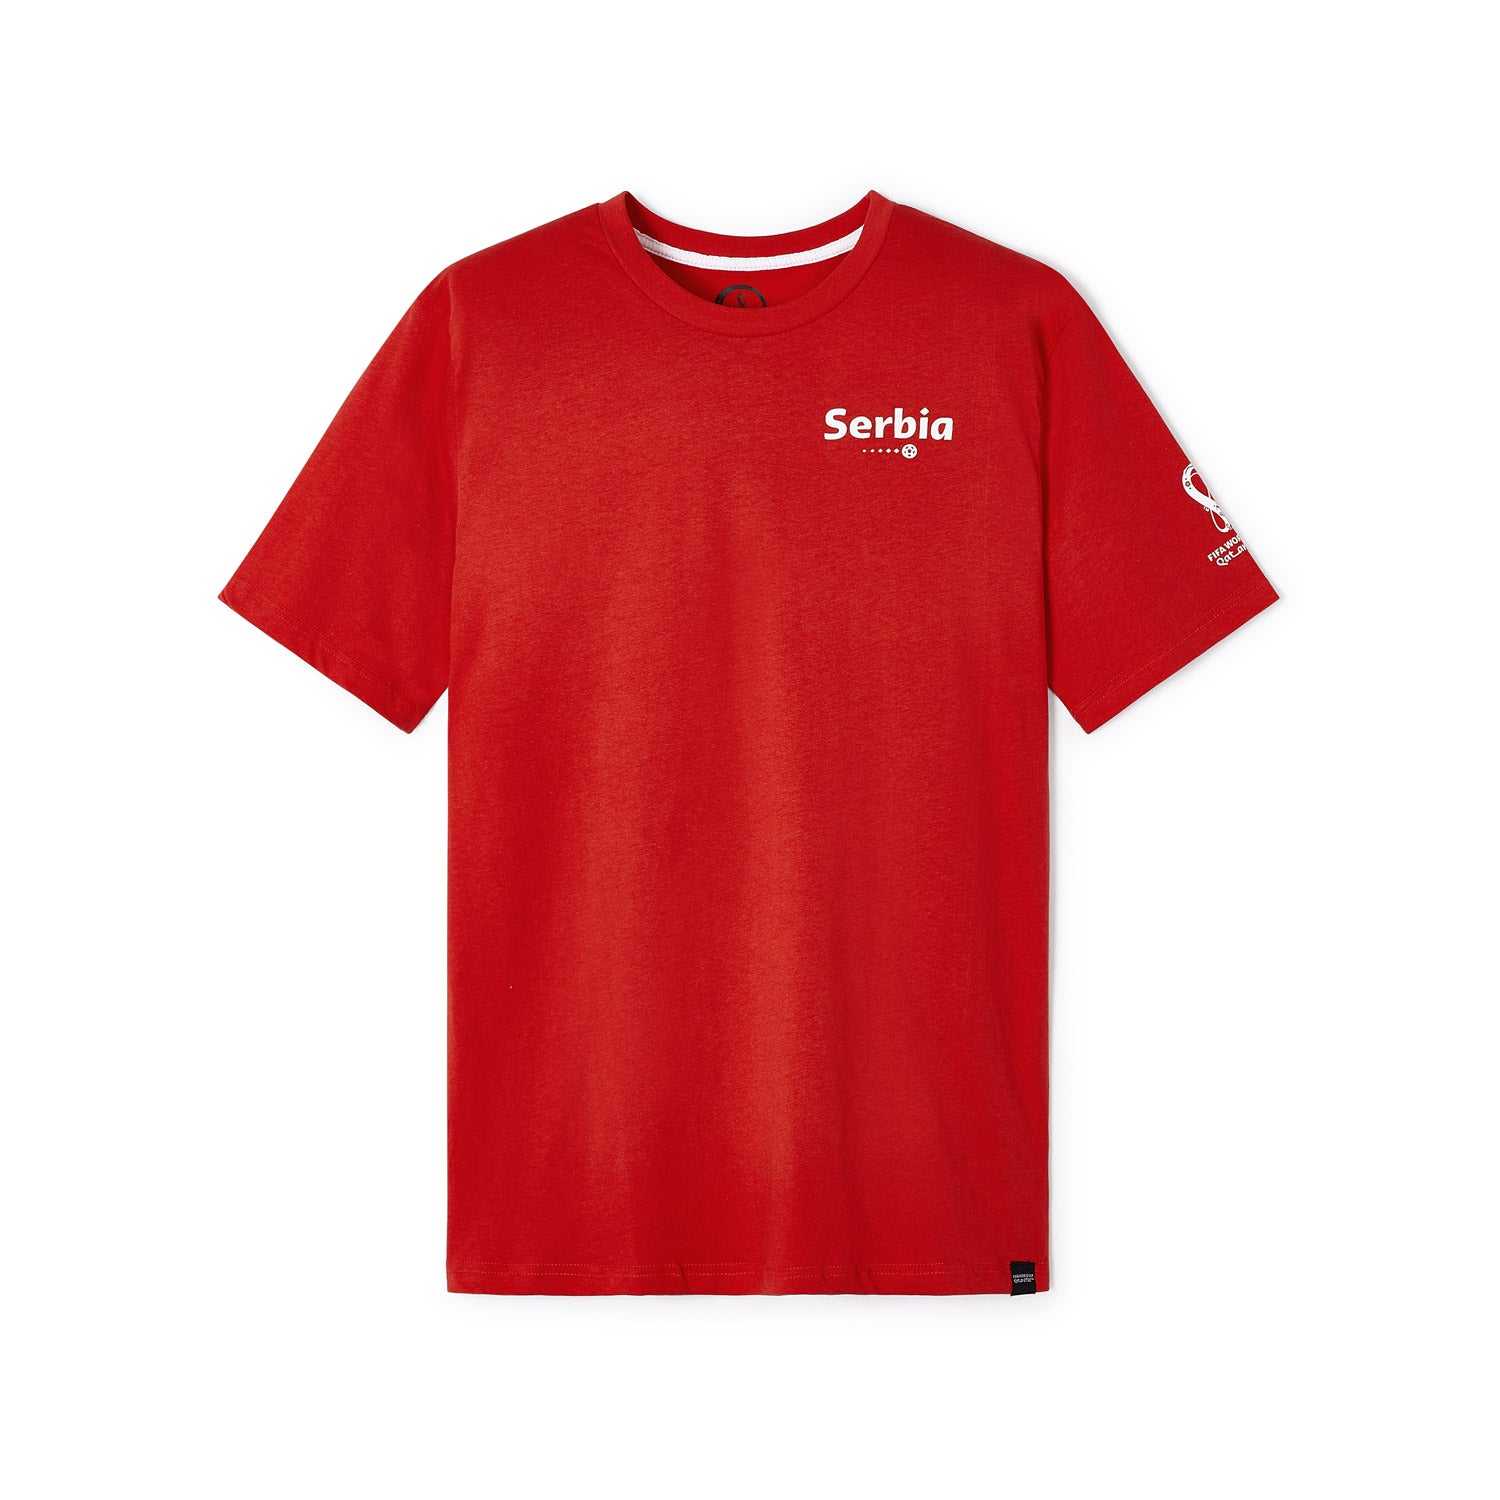 2022 World Cup Serbia Red T-Shirt - Mens